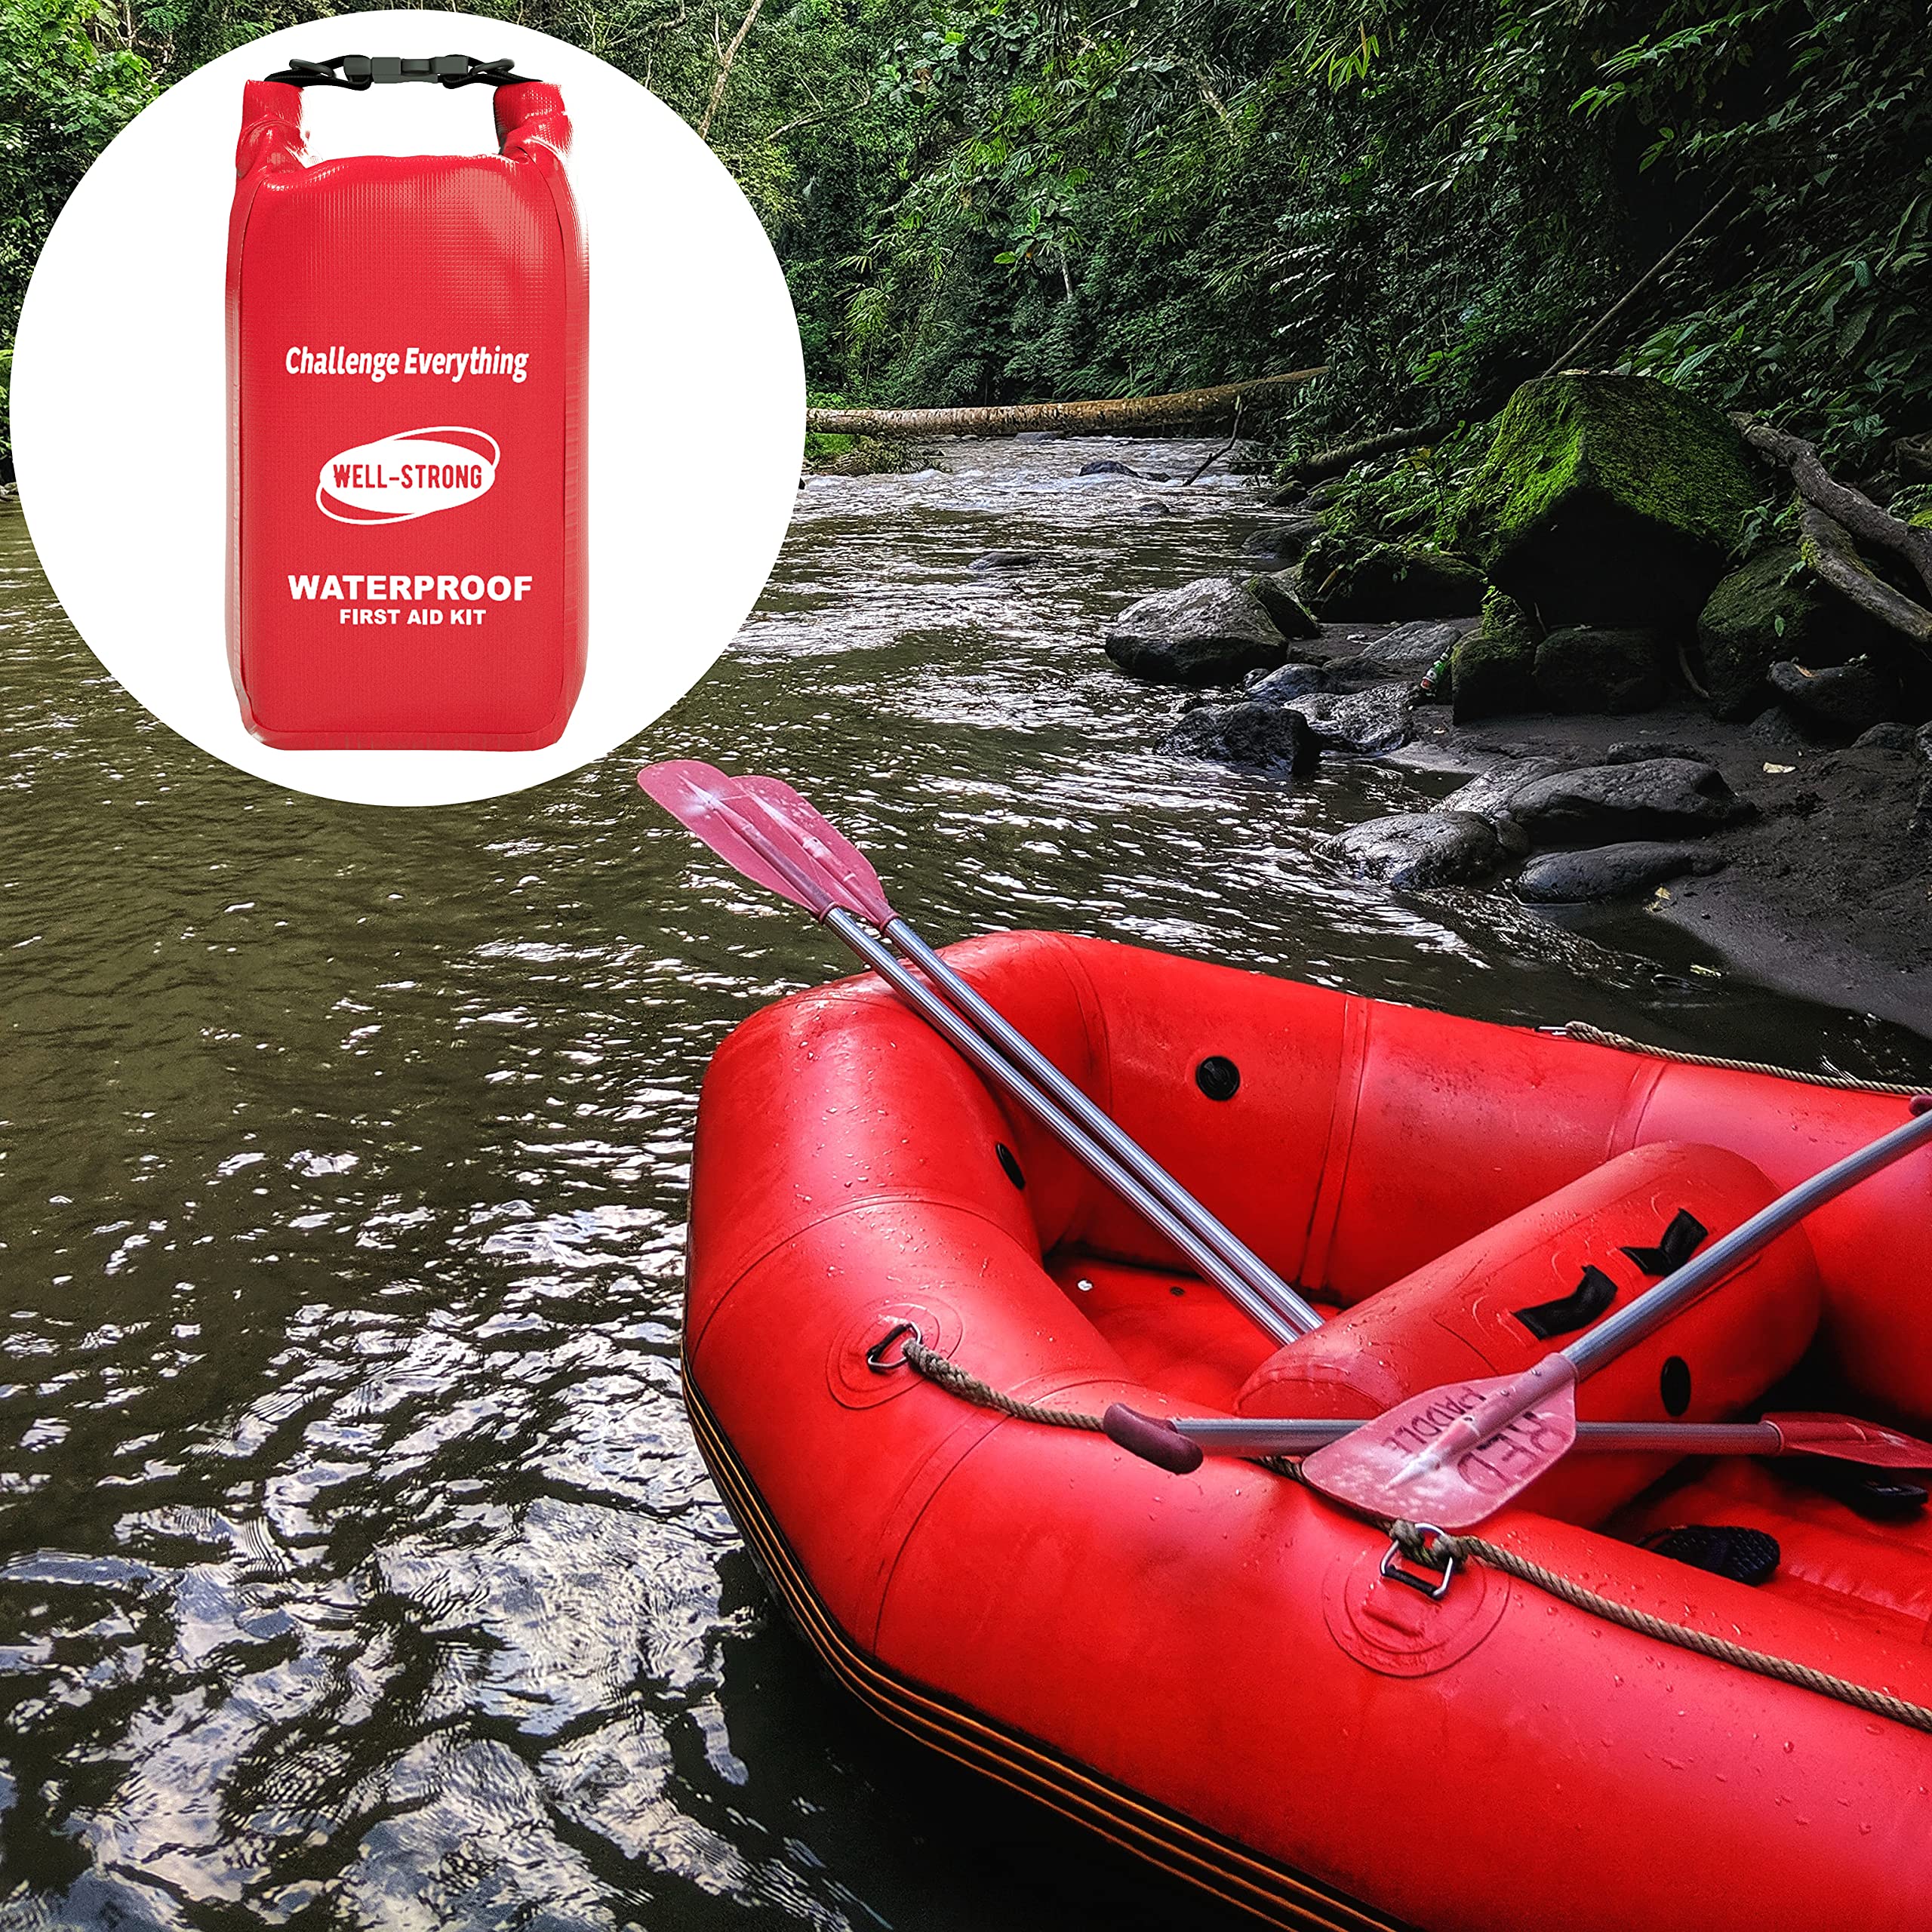 WELL-STRONG Waterproof First Aid Kit Roll Top Boat Emergency Kit with Waterproof Contents for Fishing Kayaking Boating Swimming Camping Rafting Beach Red